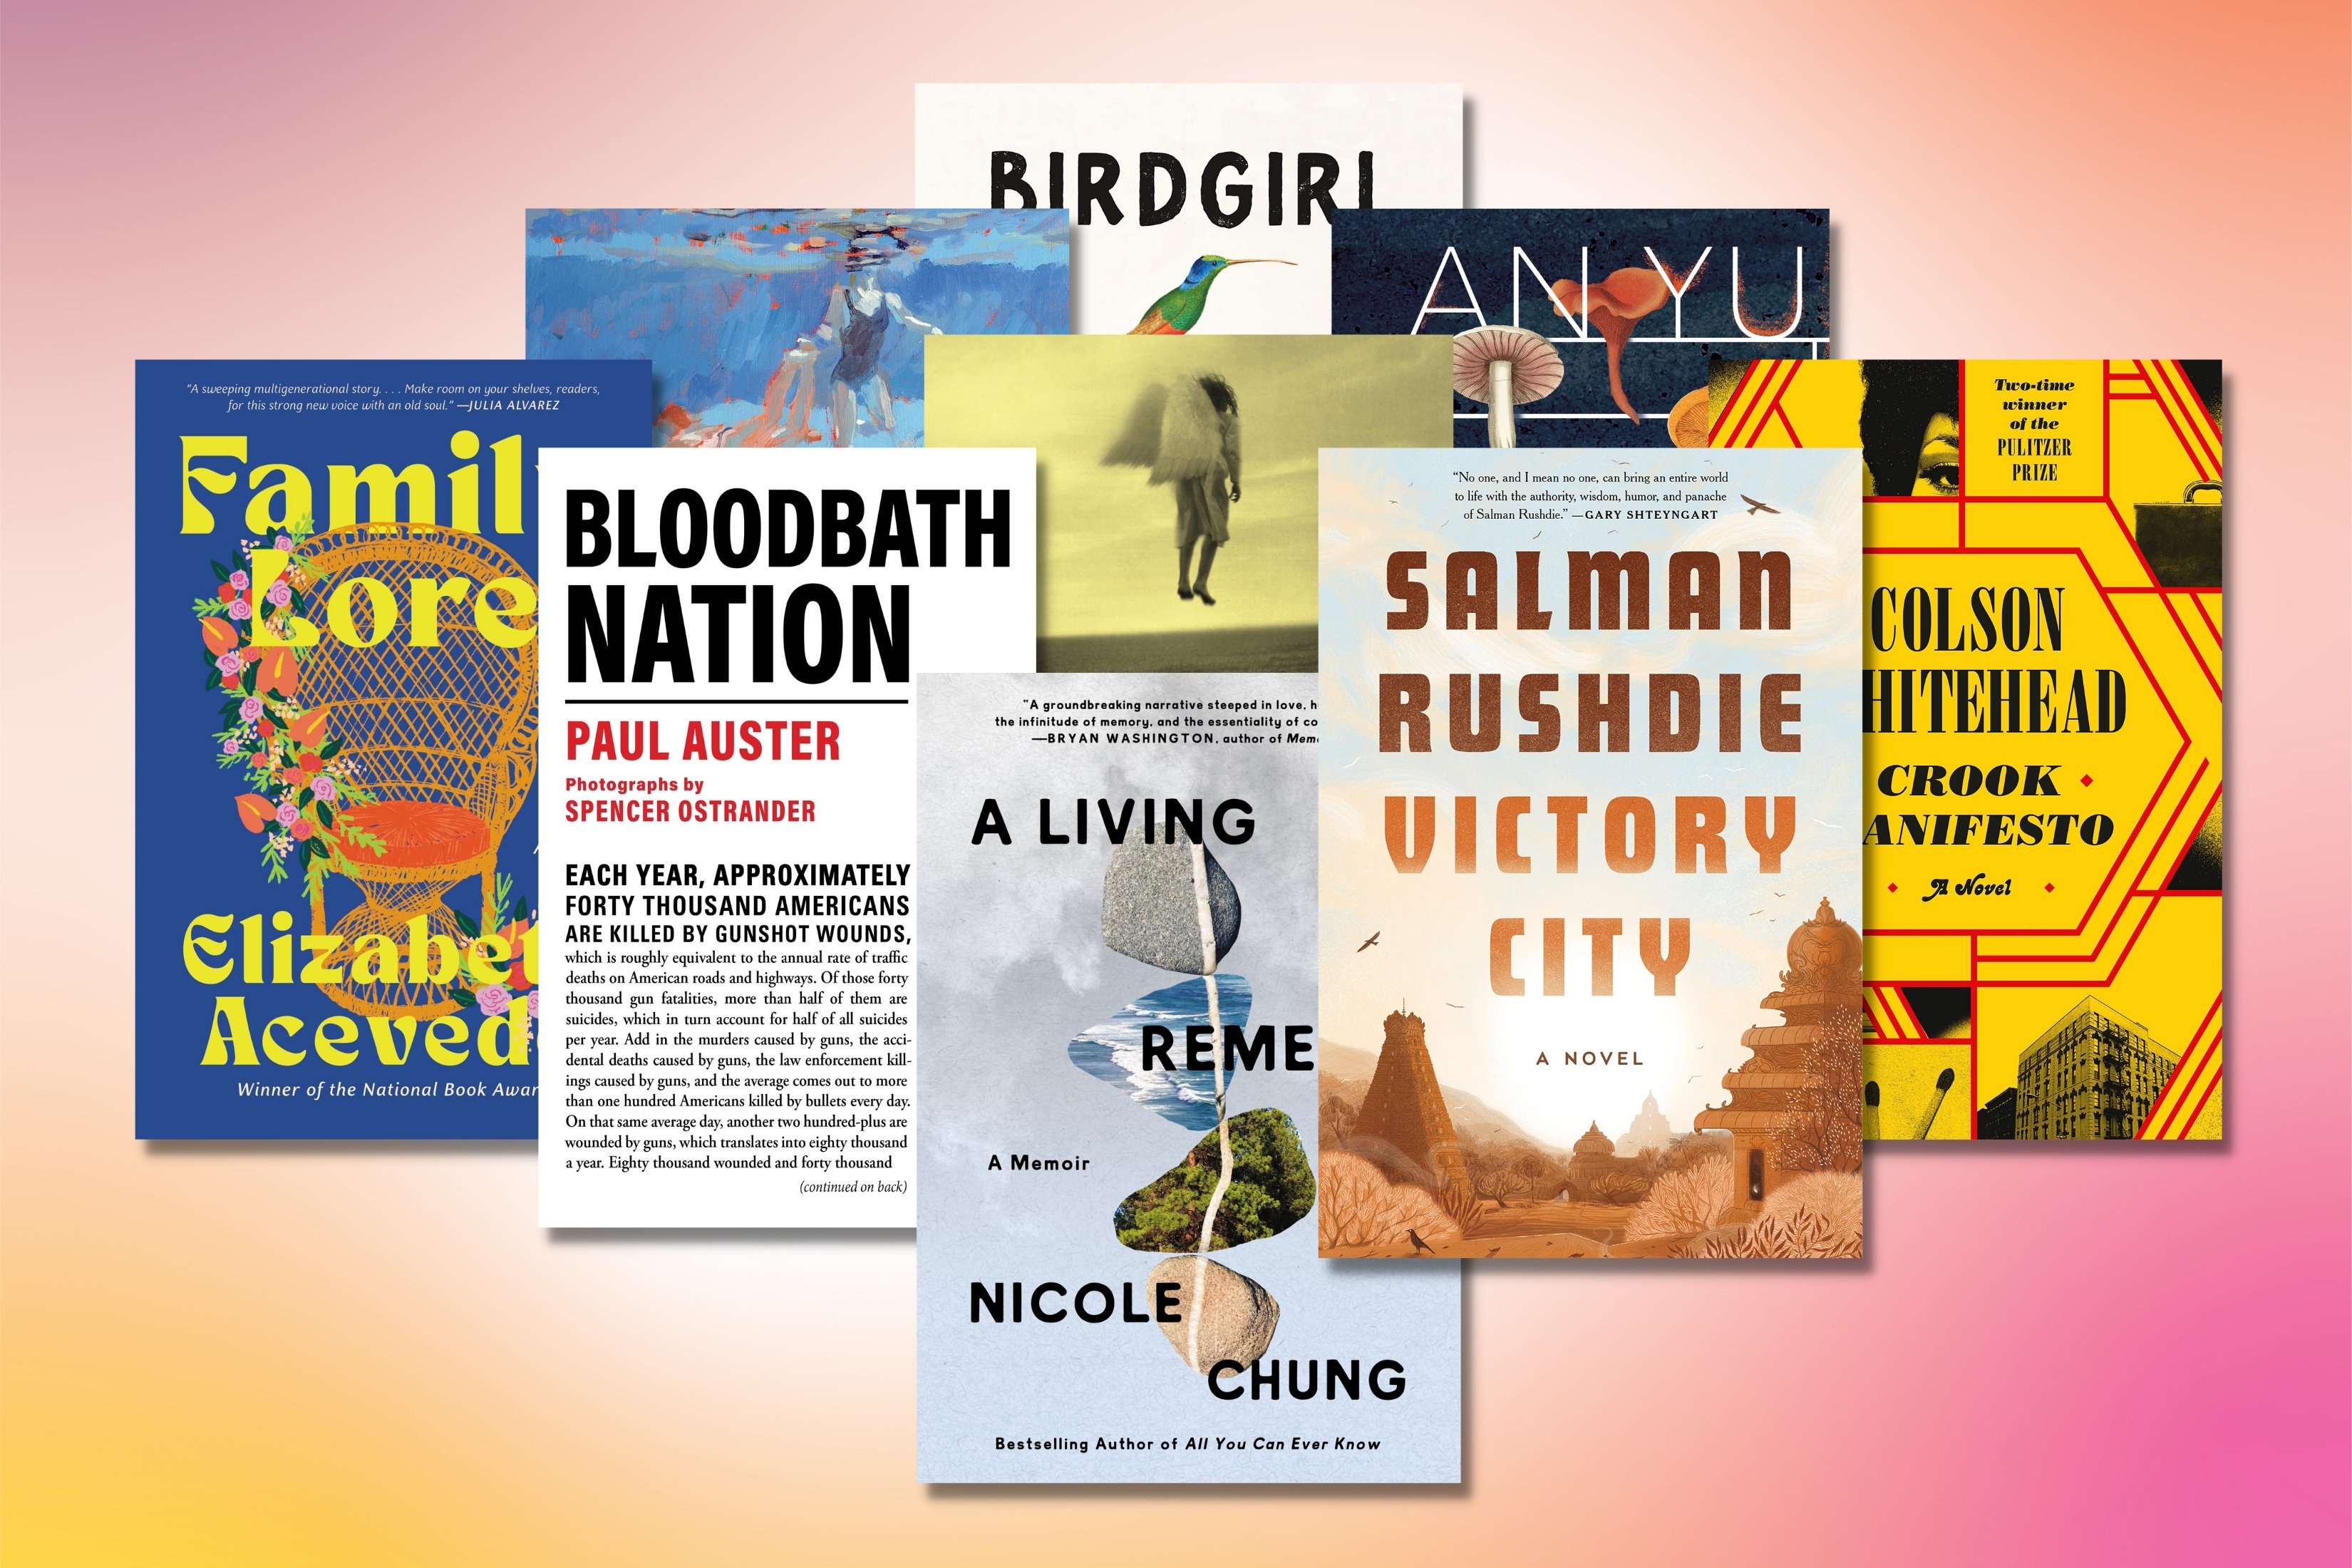 The new year promises new books from Nicole Chung, Salman Rushdie, and more